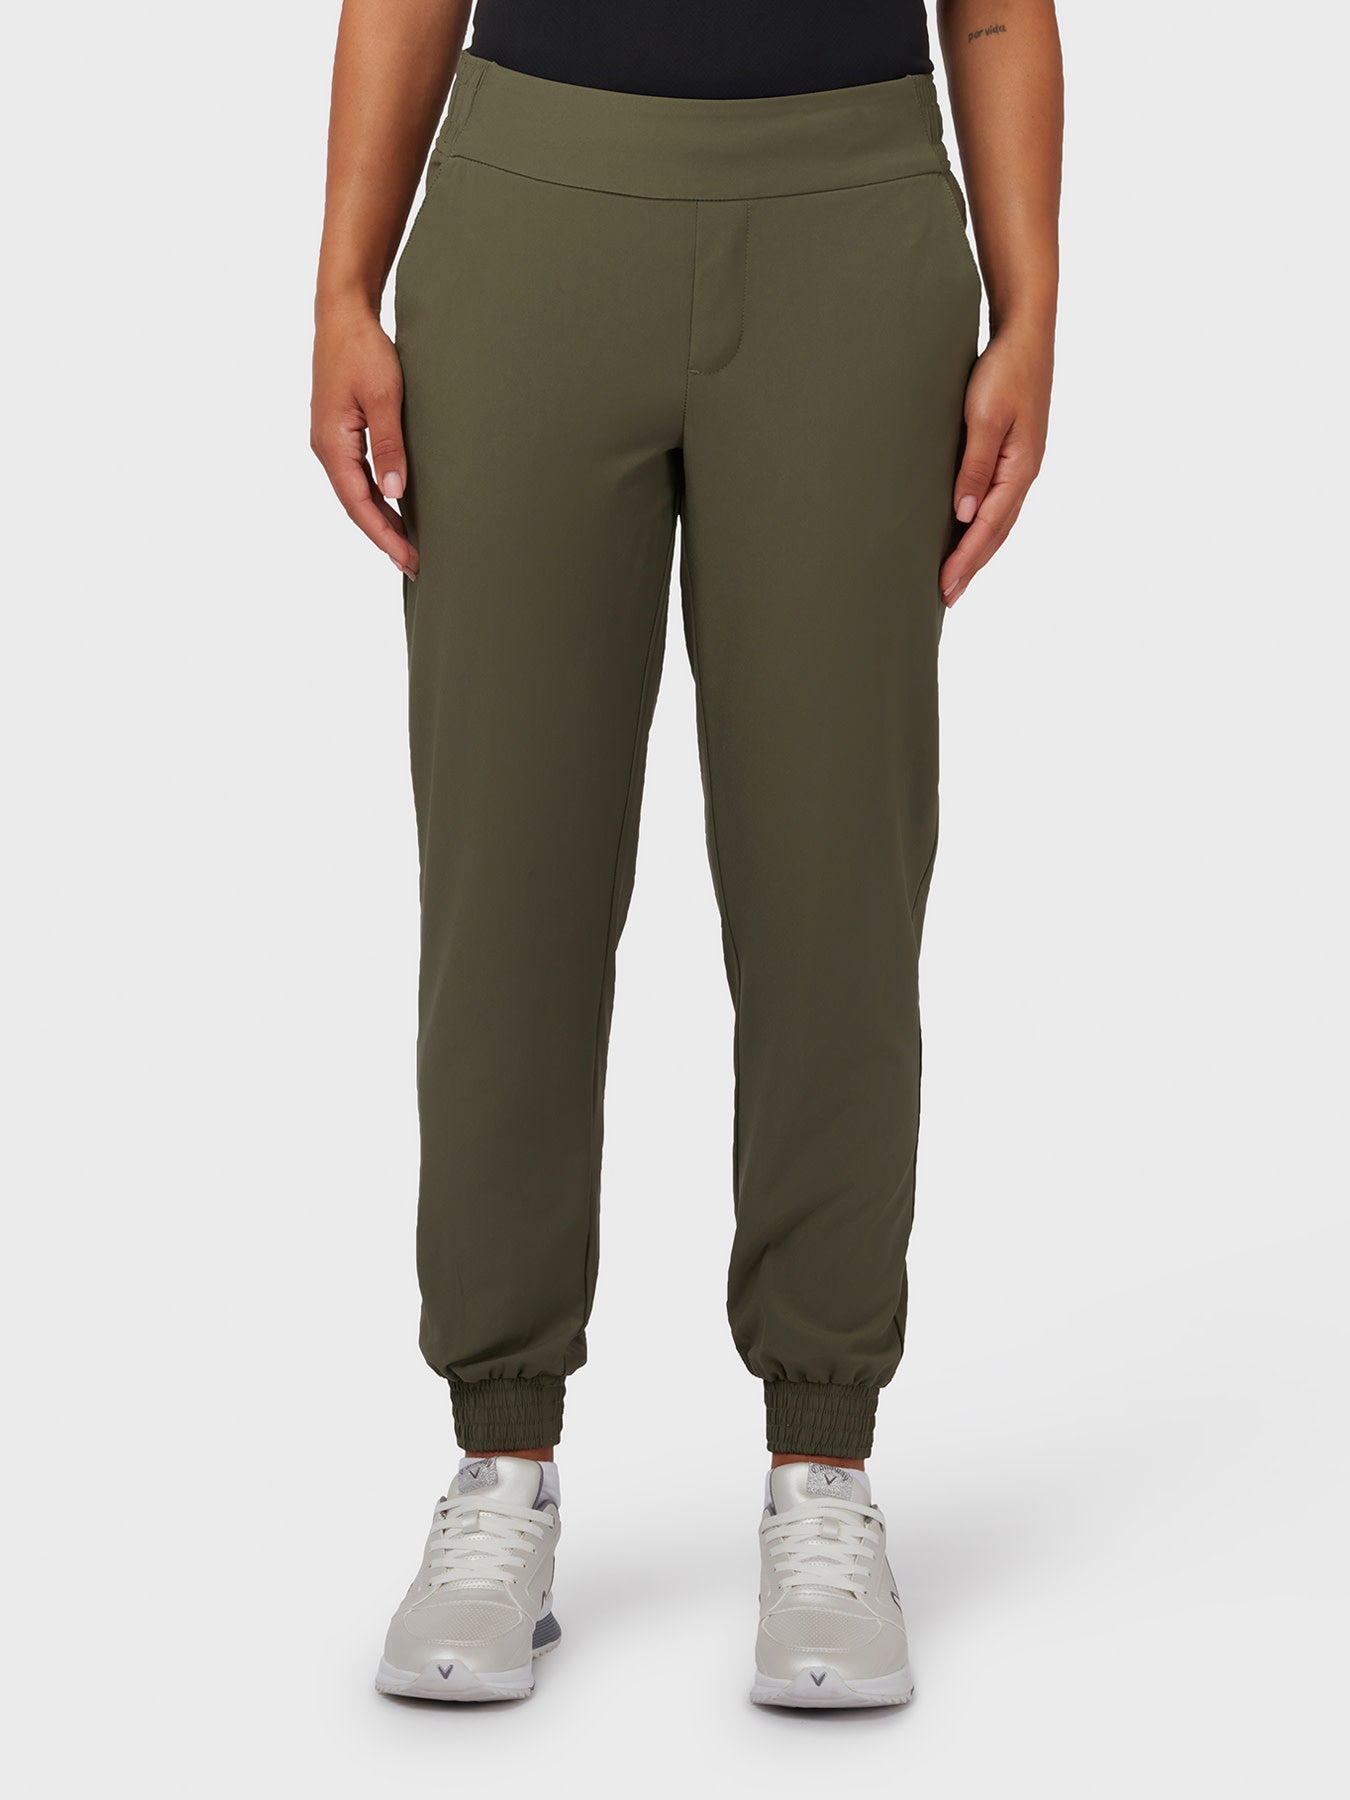 View Lightweight Womens Joggers In Industrial Green Industrial Green S information